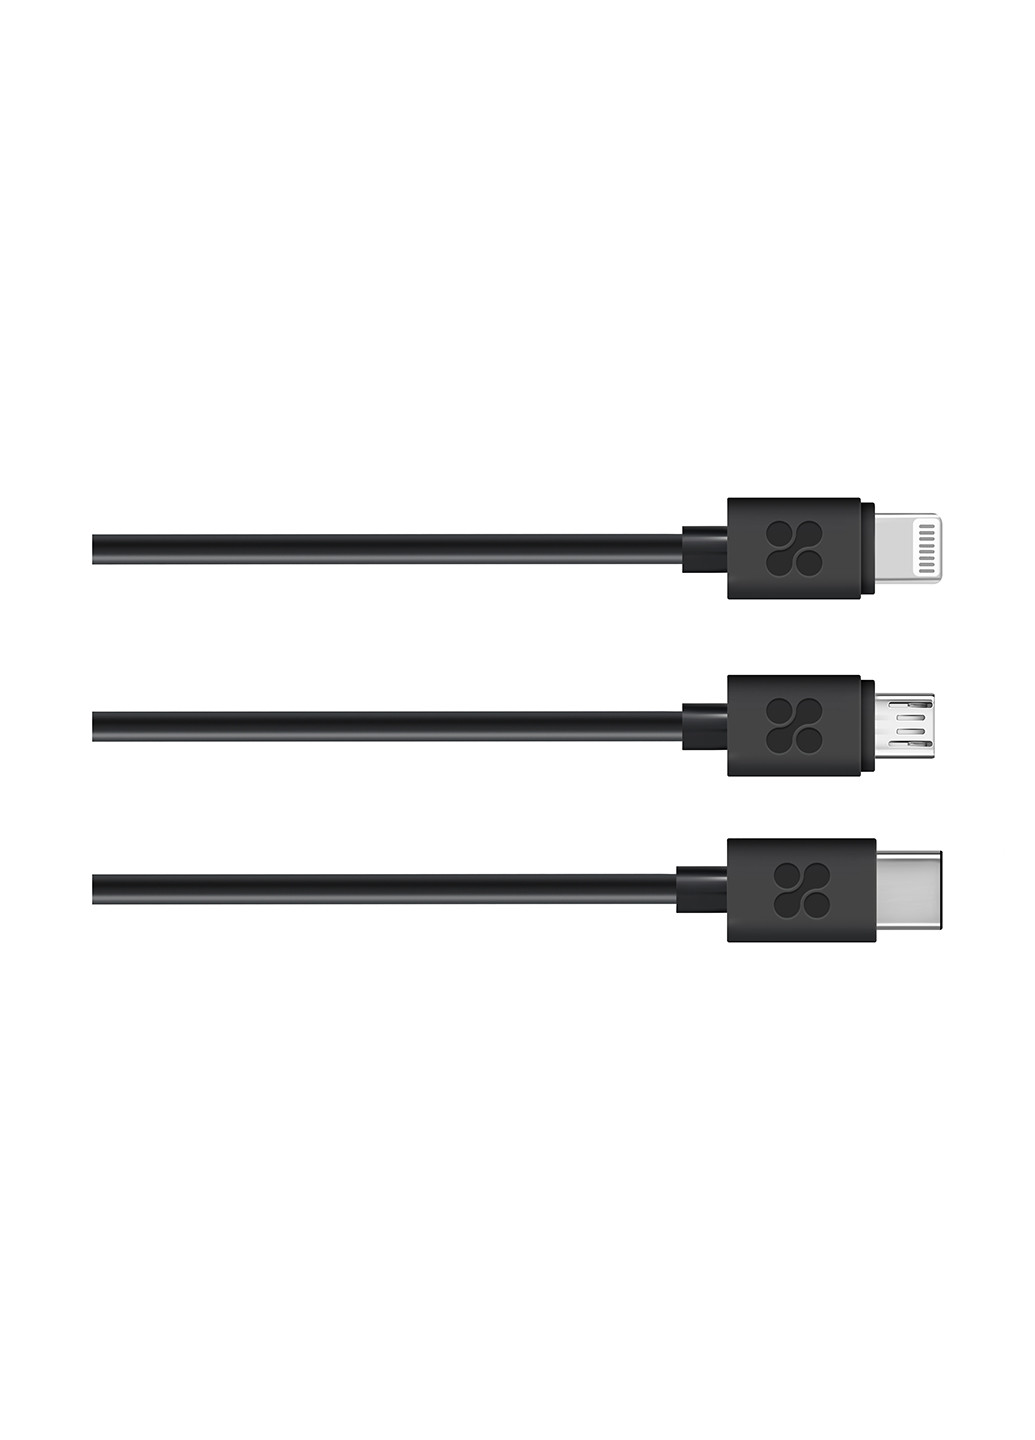 АЗУ Black Promate charger-trio (133500922)